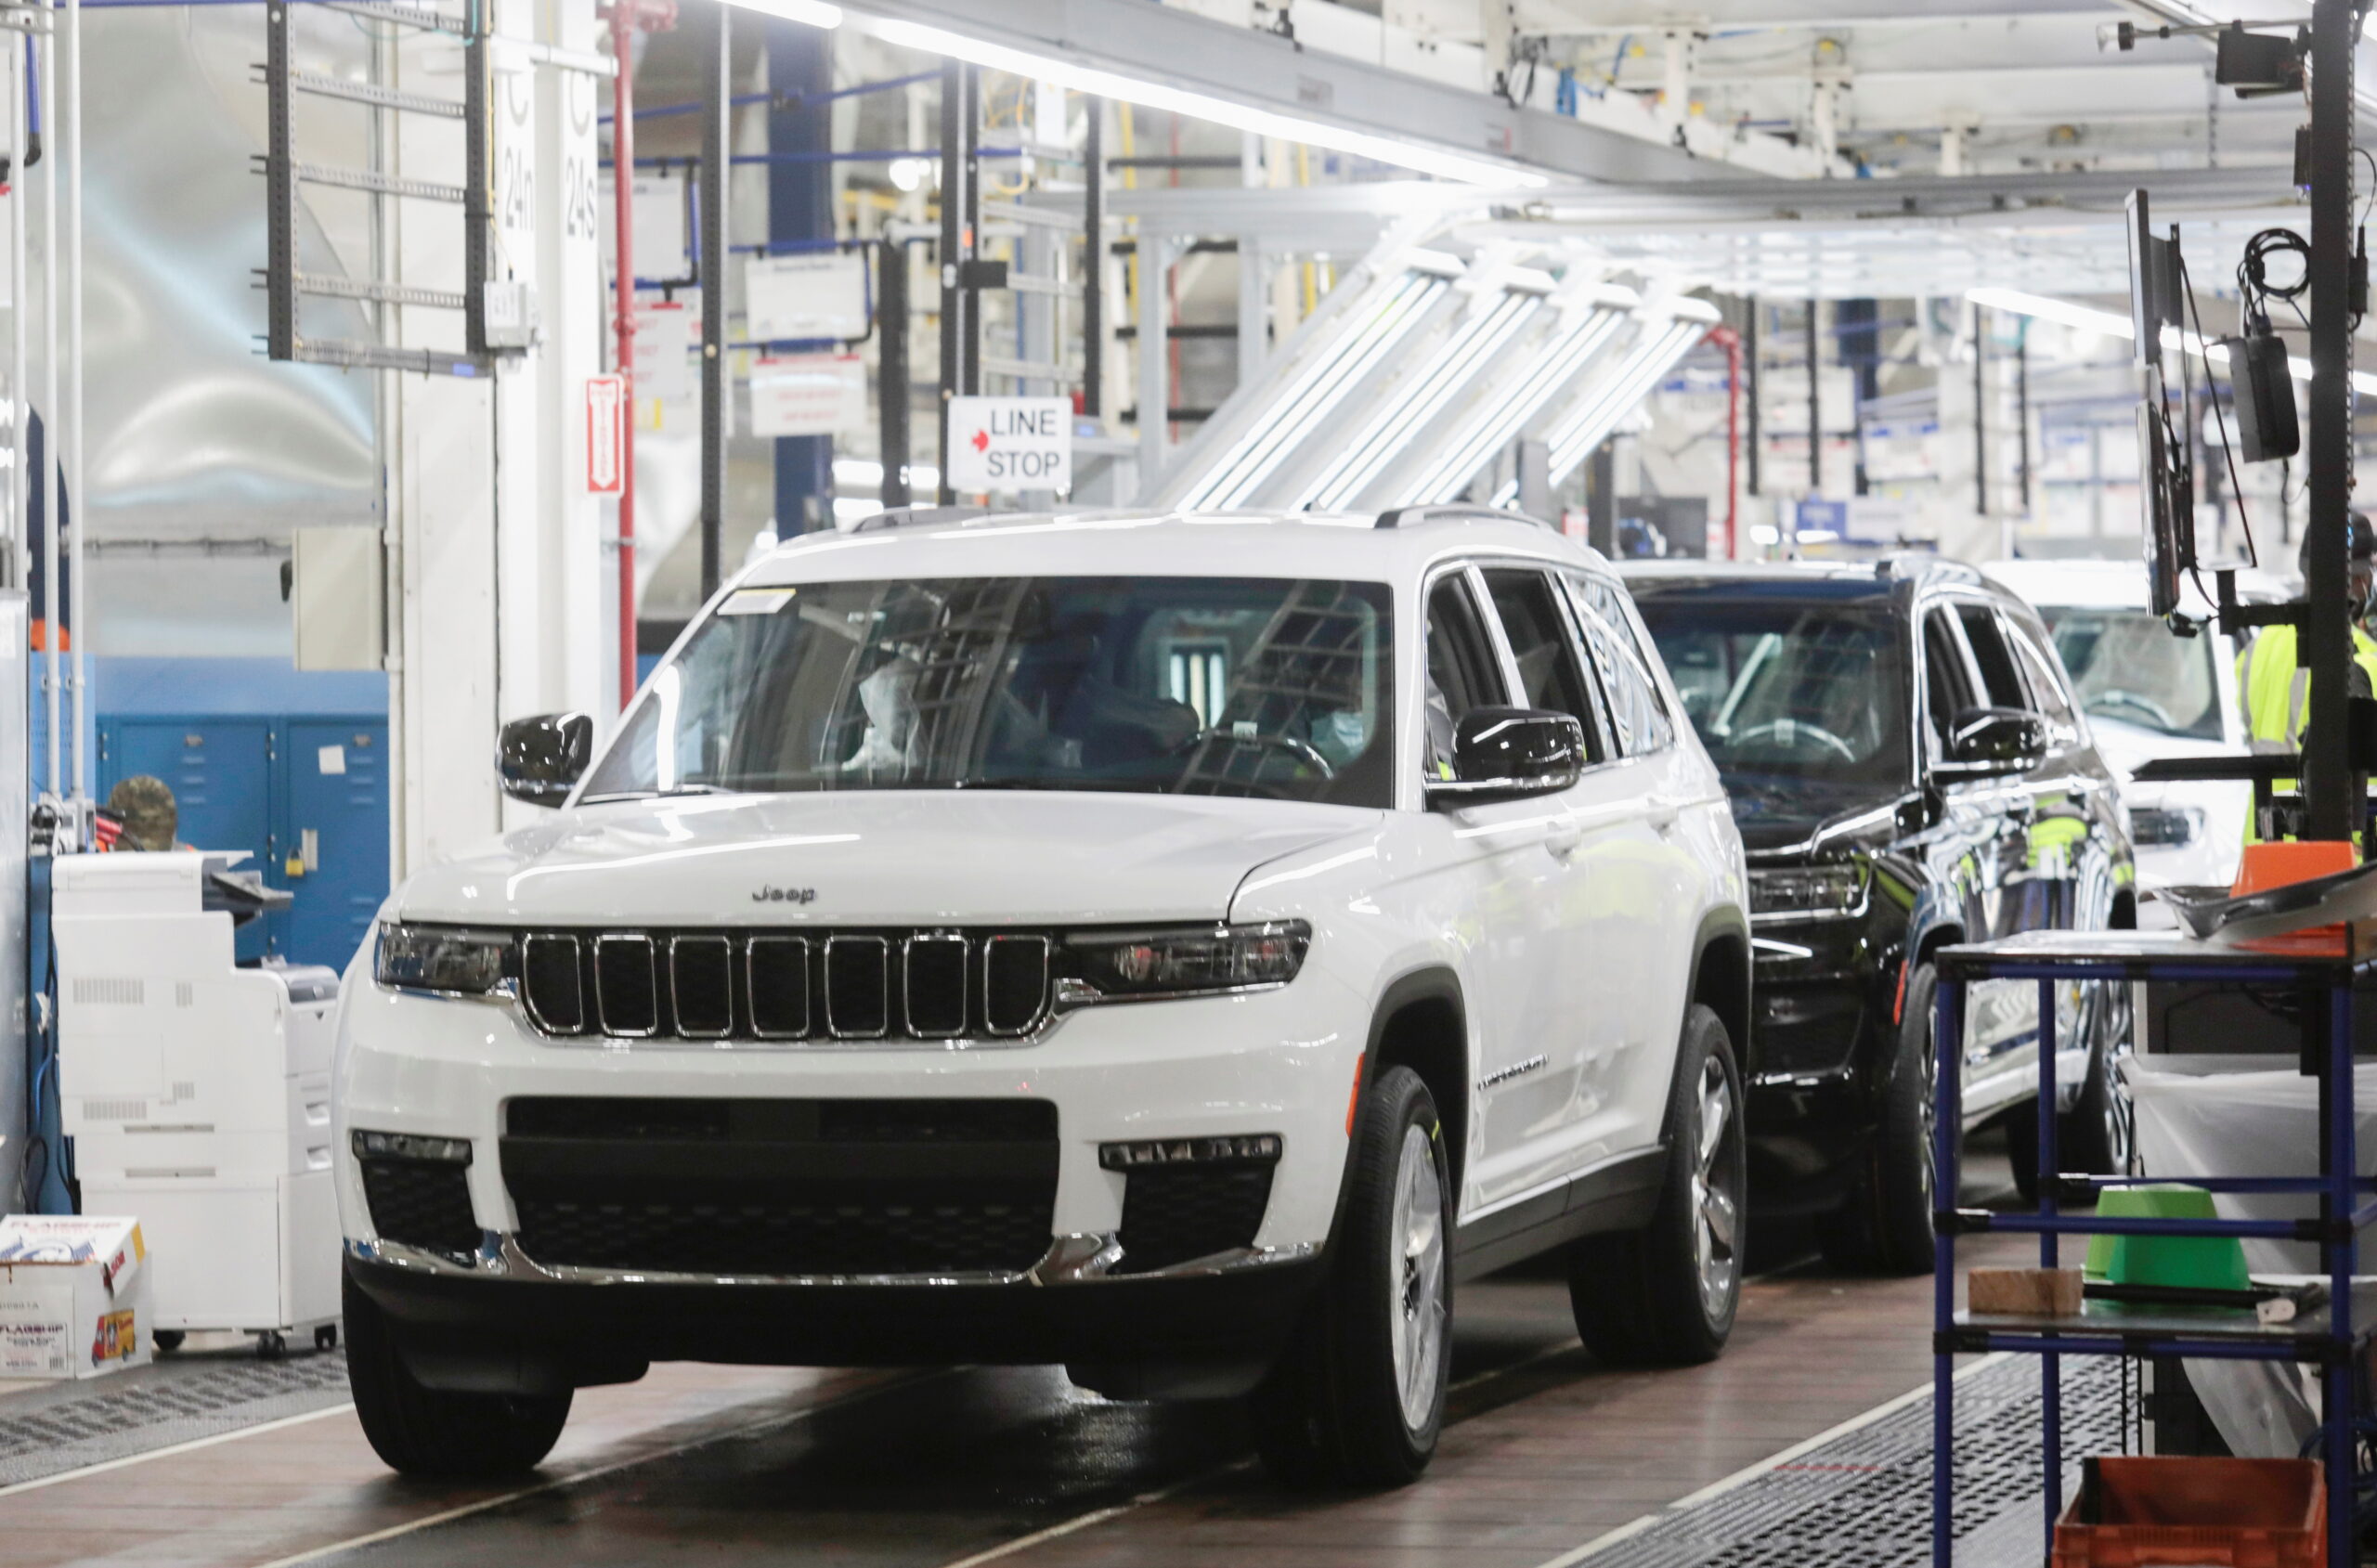 Manufacturer of Jeep attributes job reductions in their Midwest plants to California